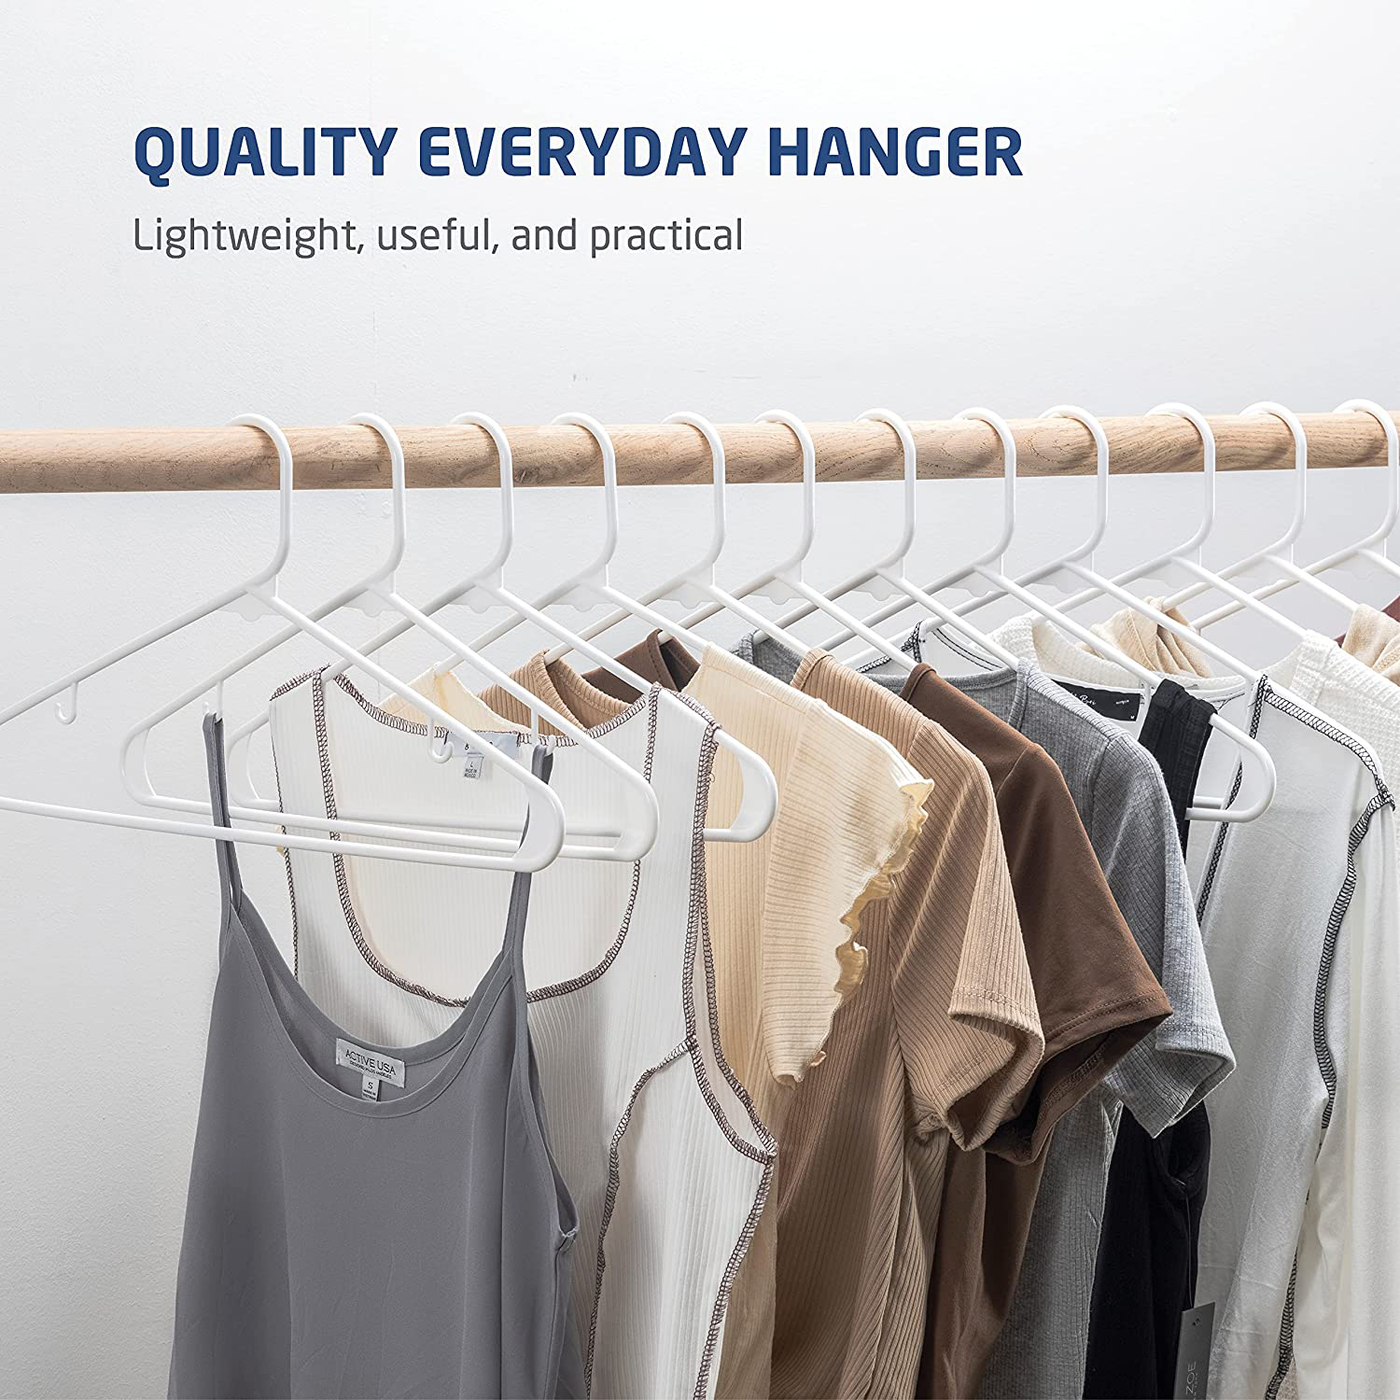 Standard Plastic Hangers Grey (50 Pack) Durable Tubular Shirt Hanger Ideal for Laundry & Everyday Use, Slim & Space Saving, Heavy Duty Clothes Hanger for Coats, Pants, Dress, Etc. Hangs up to 5.5 lbs